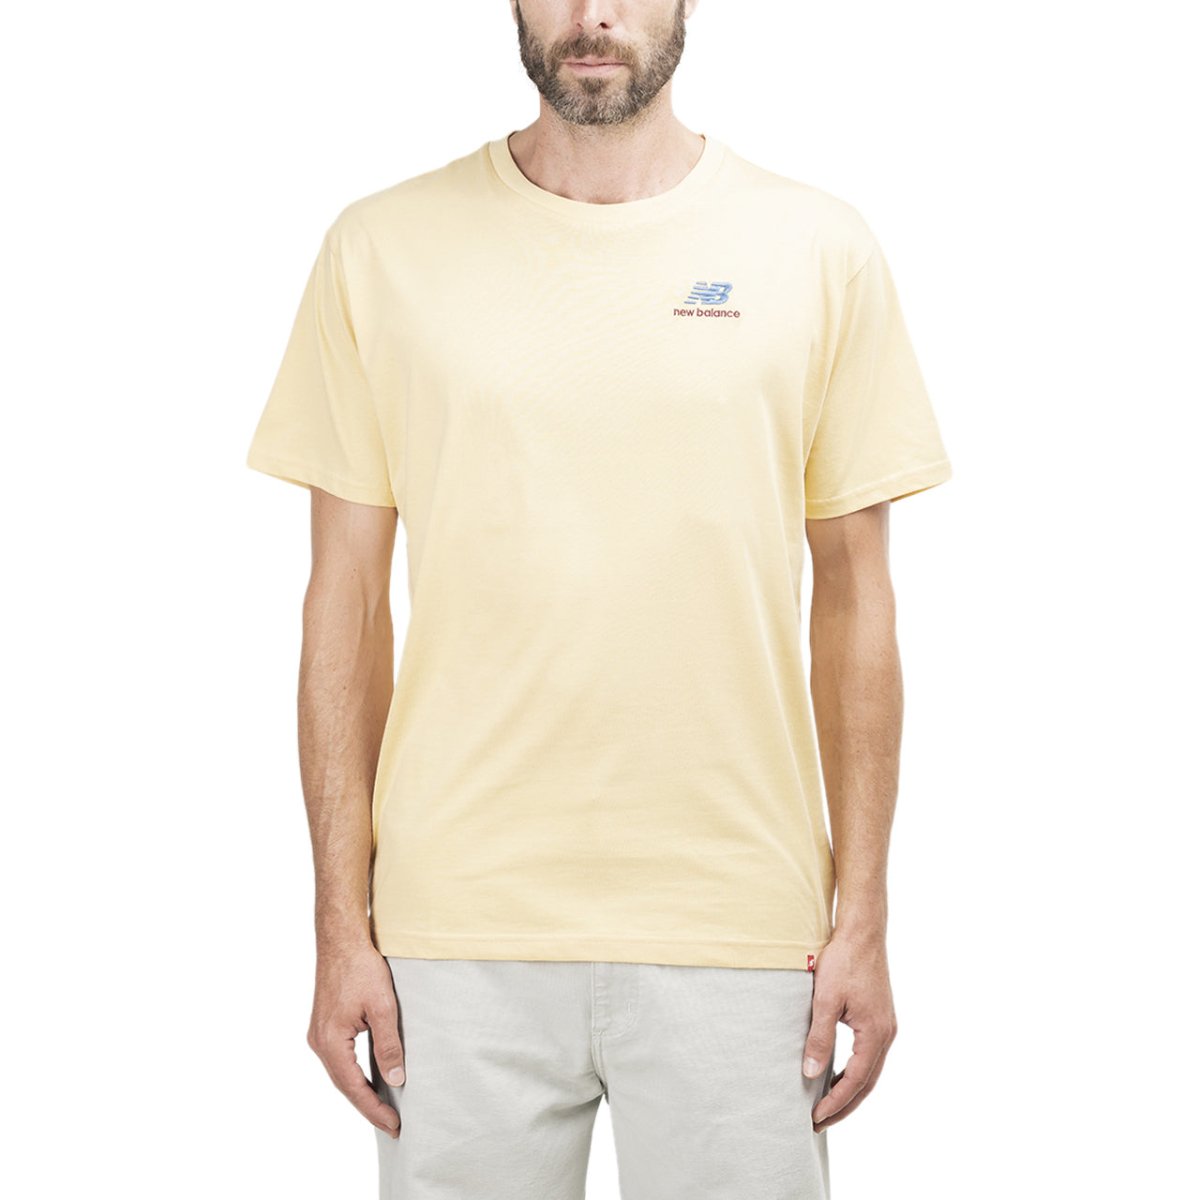 Image of New Balance Essentials Embroidered T-Shirt (Yellow)